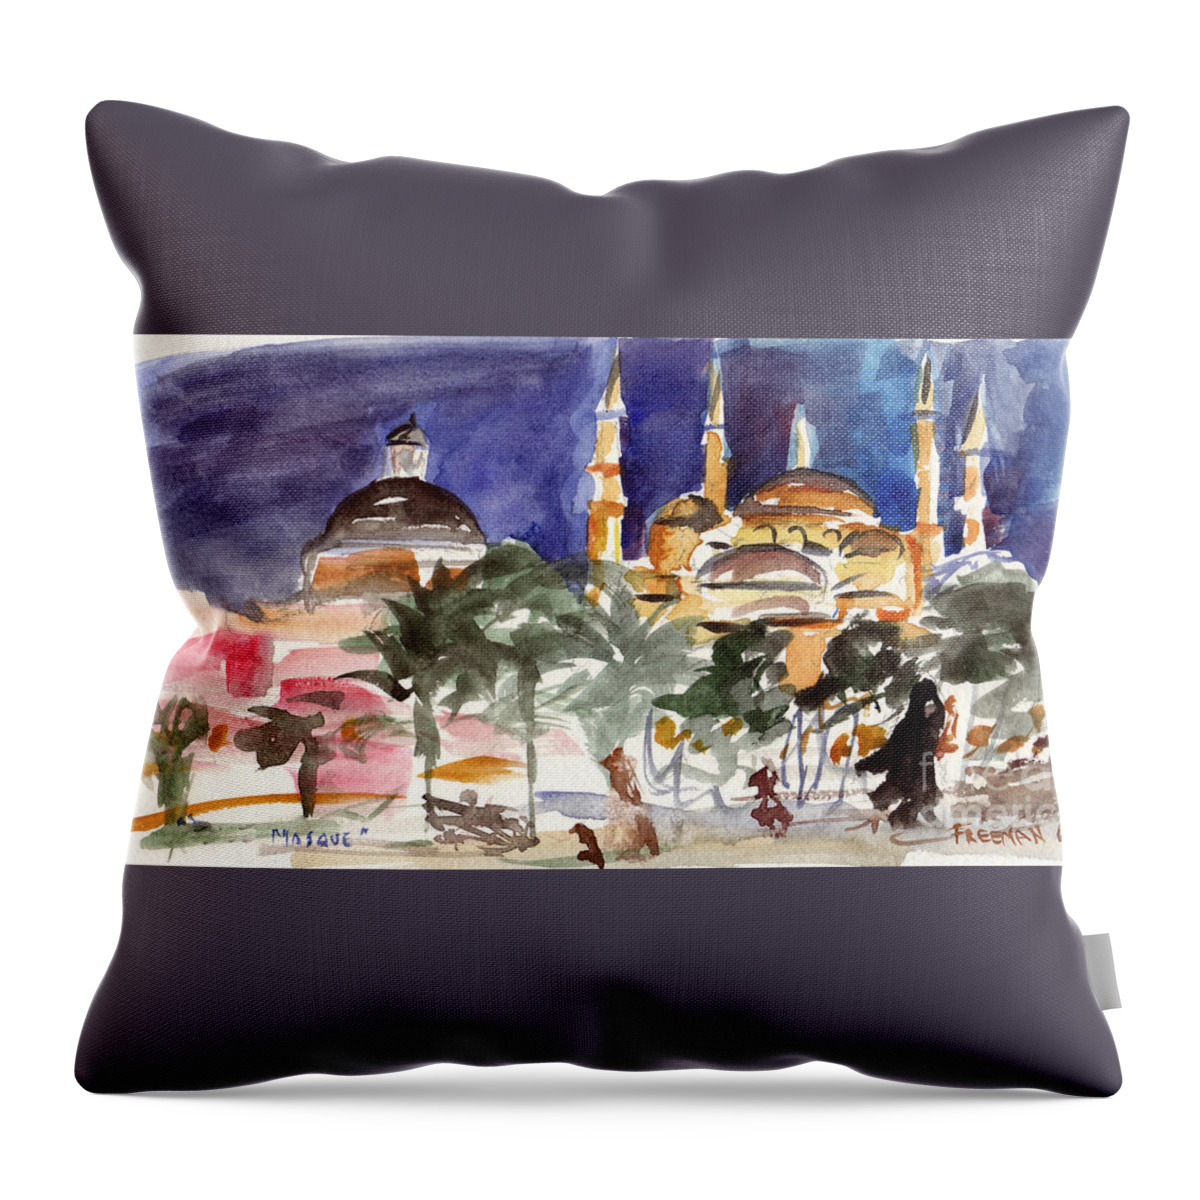 Crystal Cruises Throw Pillow featuring the painting Sophia Mosque by Valerie Freeman